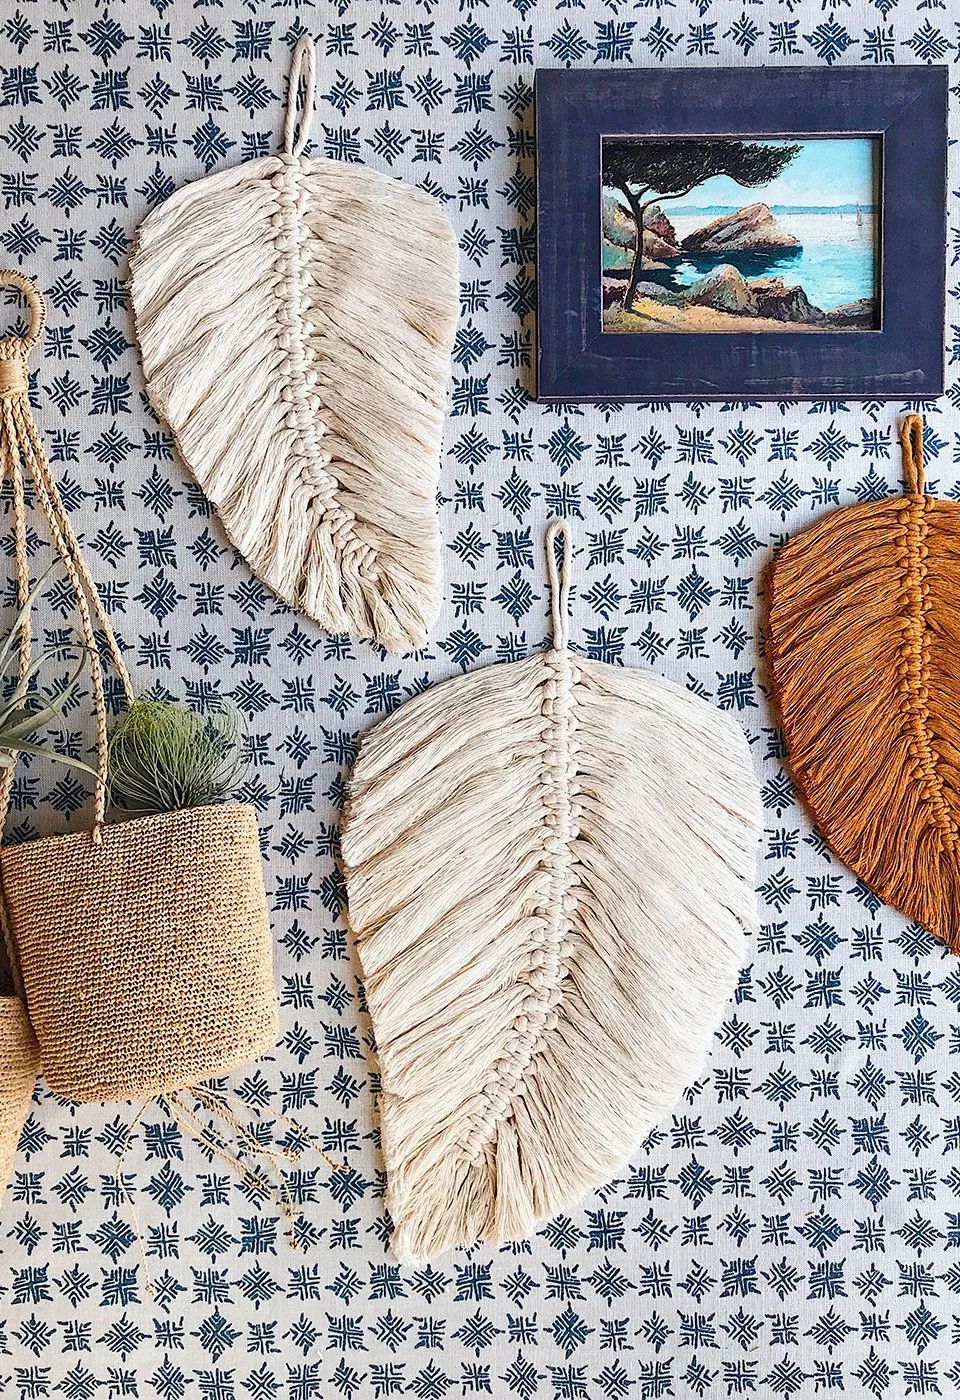 Macrame feathers hanging on a wall